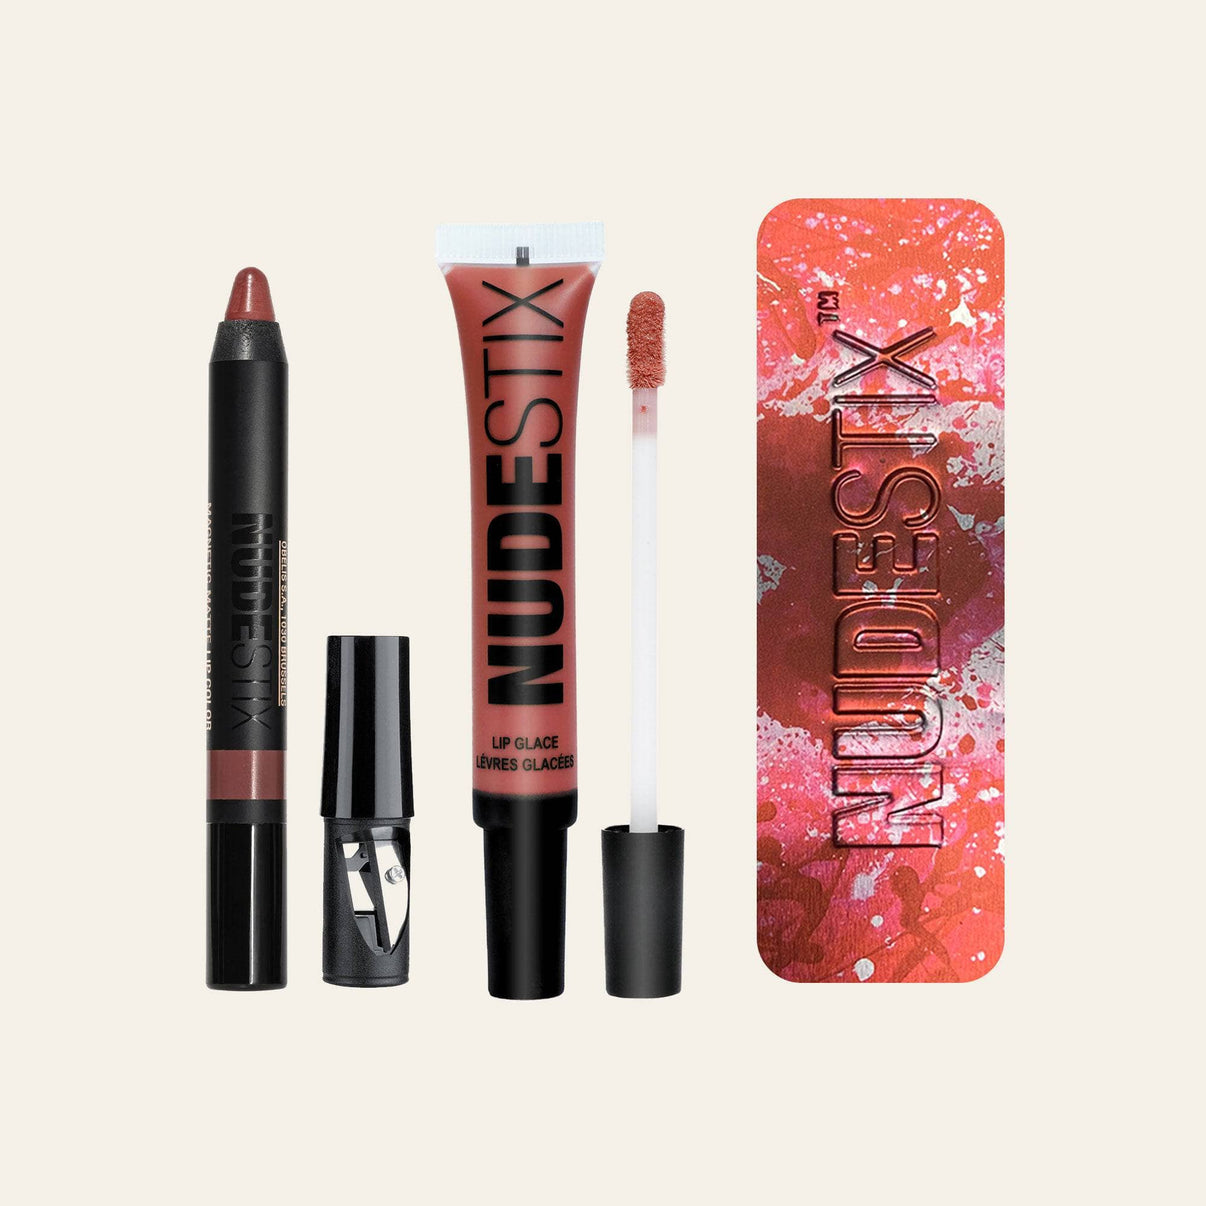 Protect, Perfect + Plump Lip Kit in Rose with Nudestix can